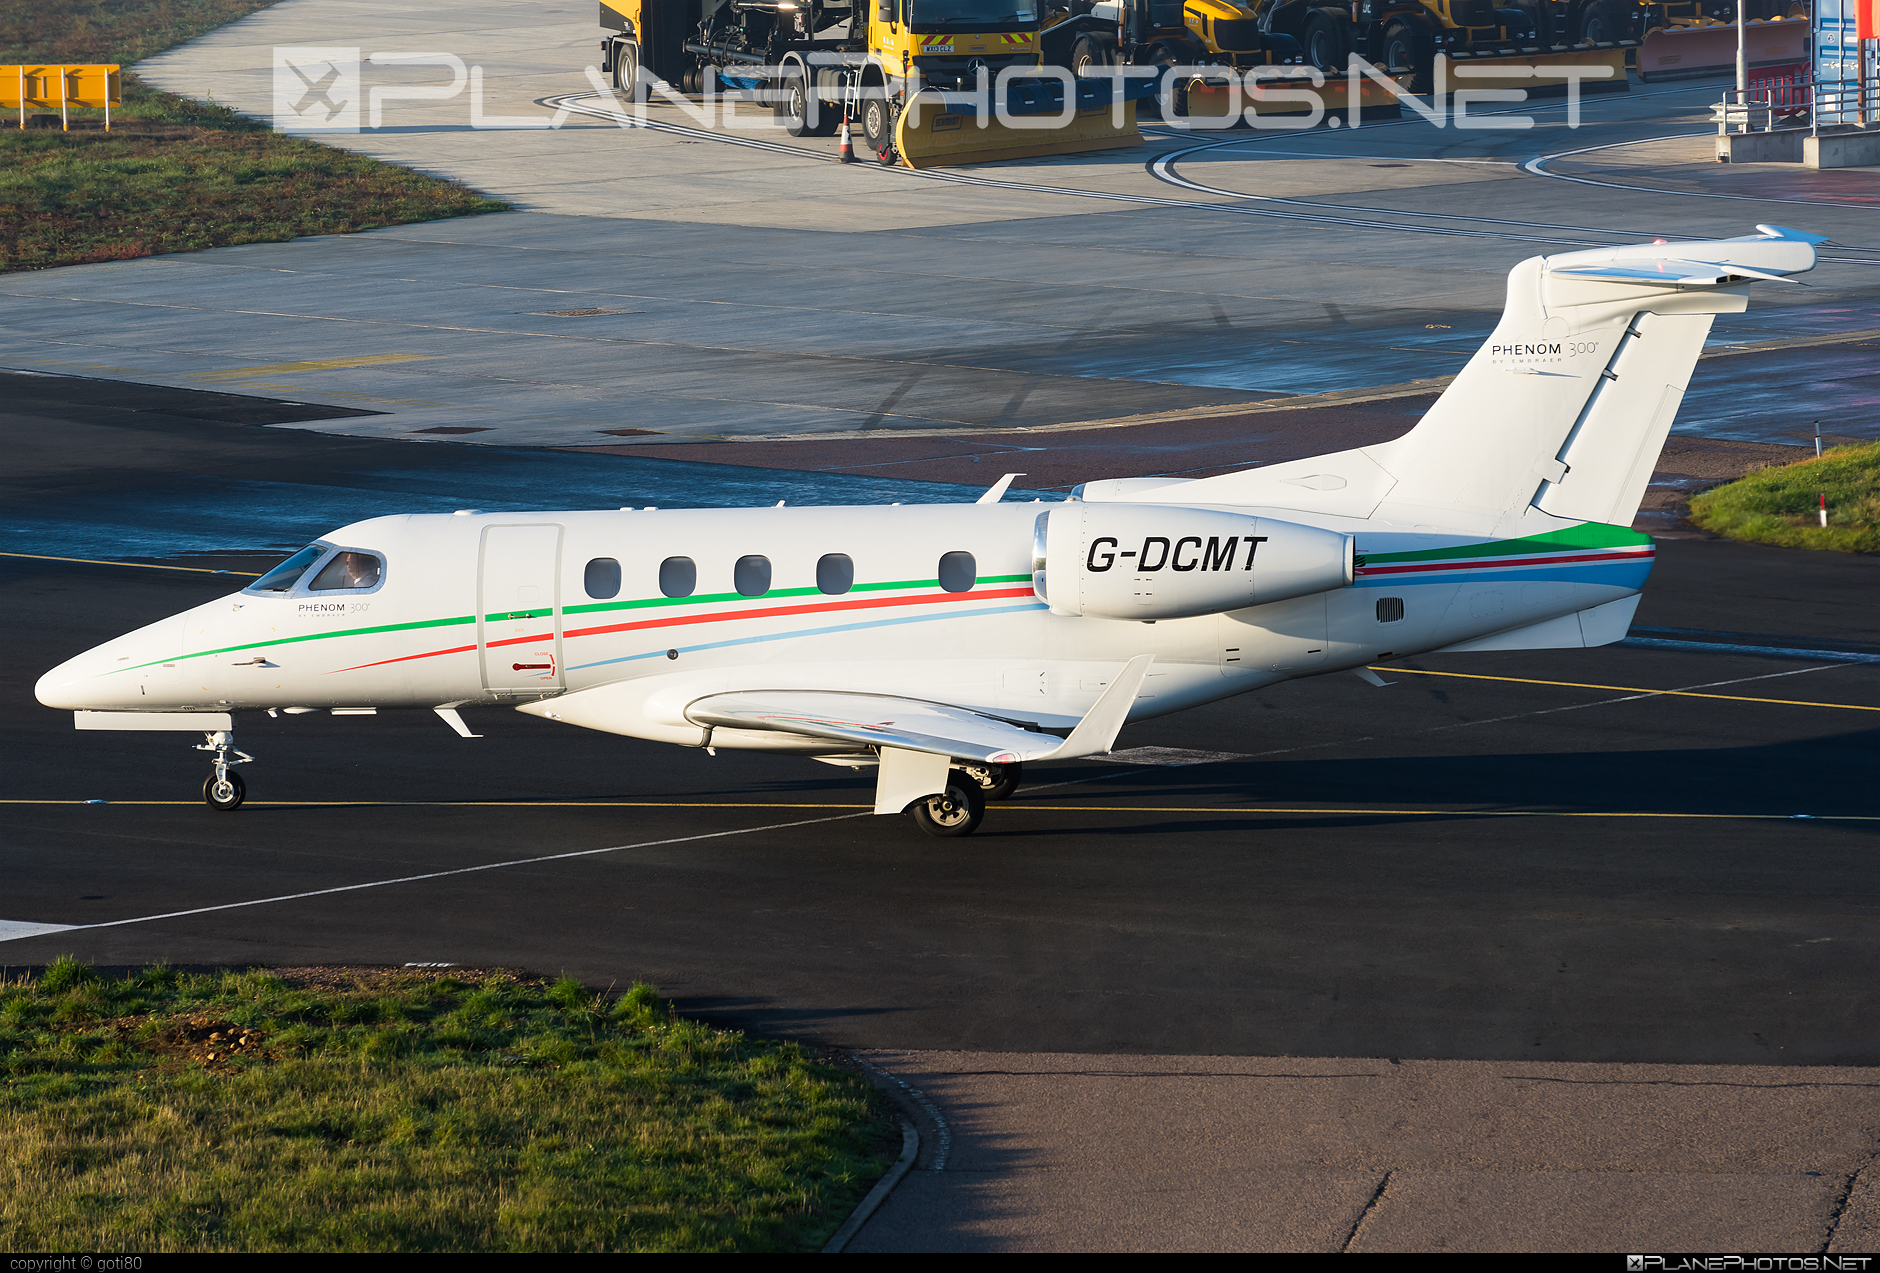 Embraer Phenom 300 (EMB-505) - G-DCMT operated by Centreline AV #centreline #centrelineav #emb505 #embraer #embraer505 #embraerphenom #embraerphenom300 #phenom300